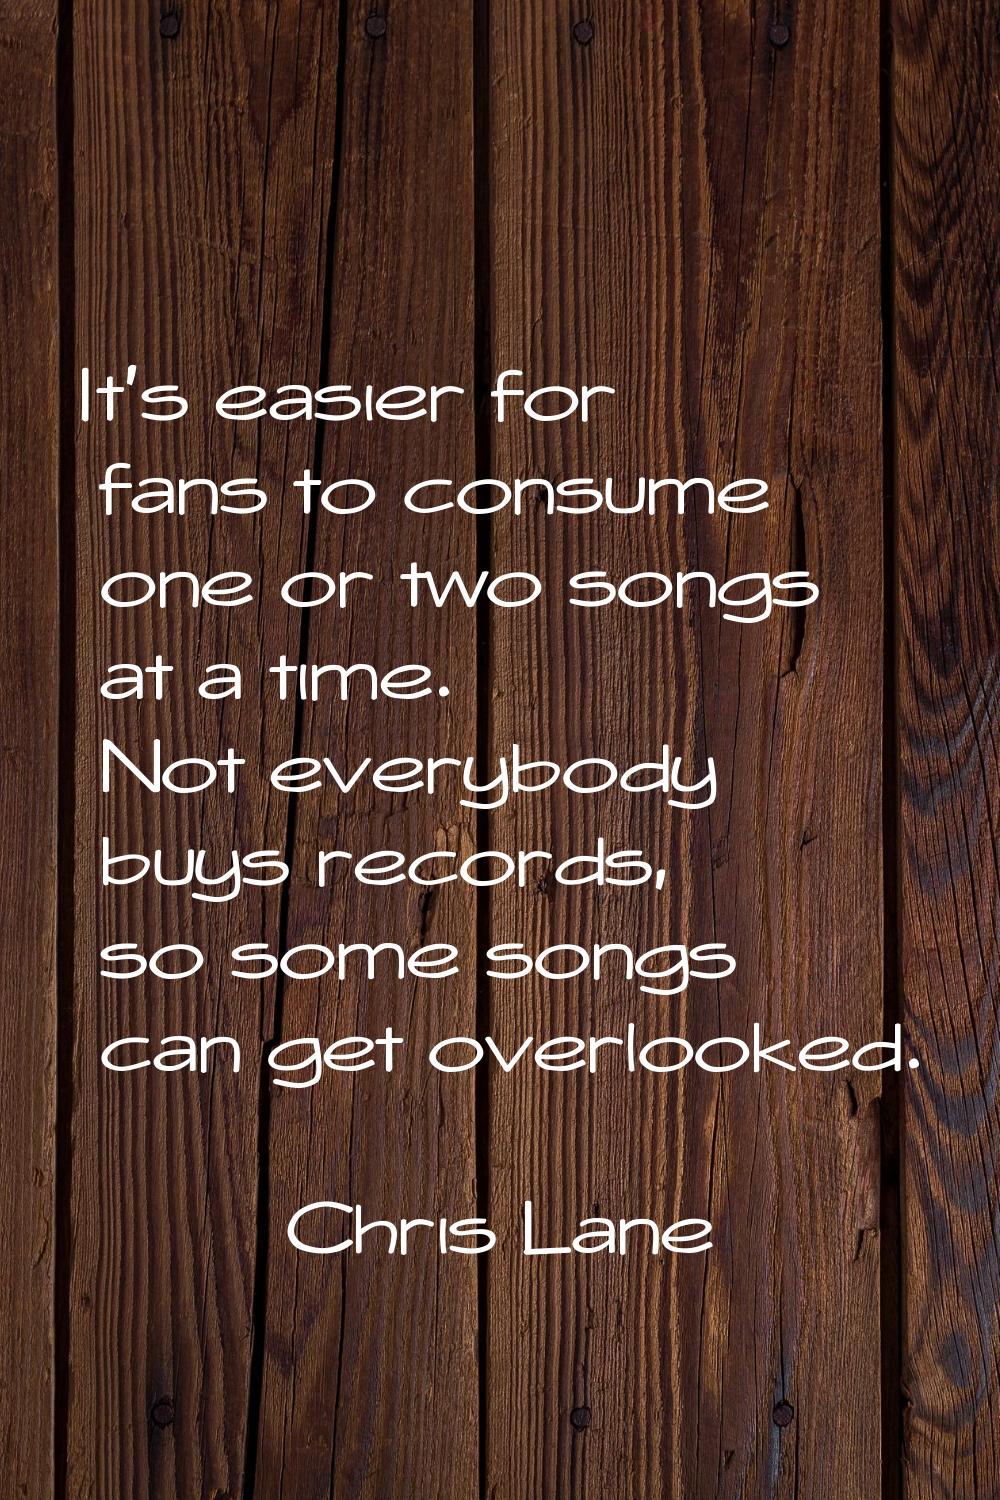 It's easier for fans to consume one or two songs at a time. Not everybody buys records, so some son